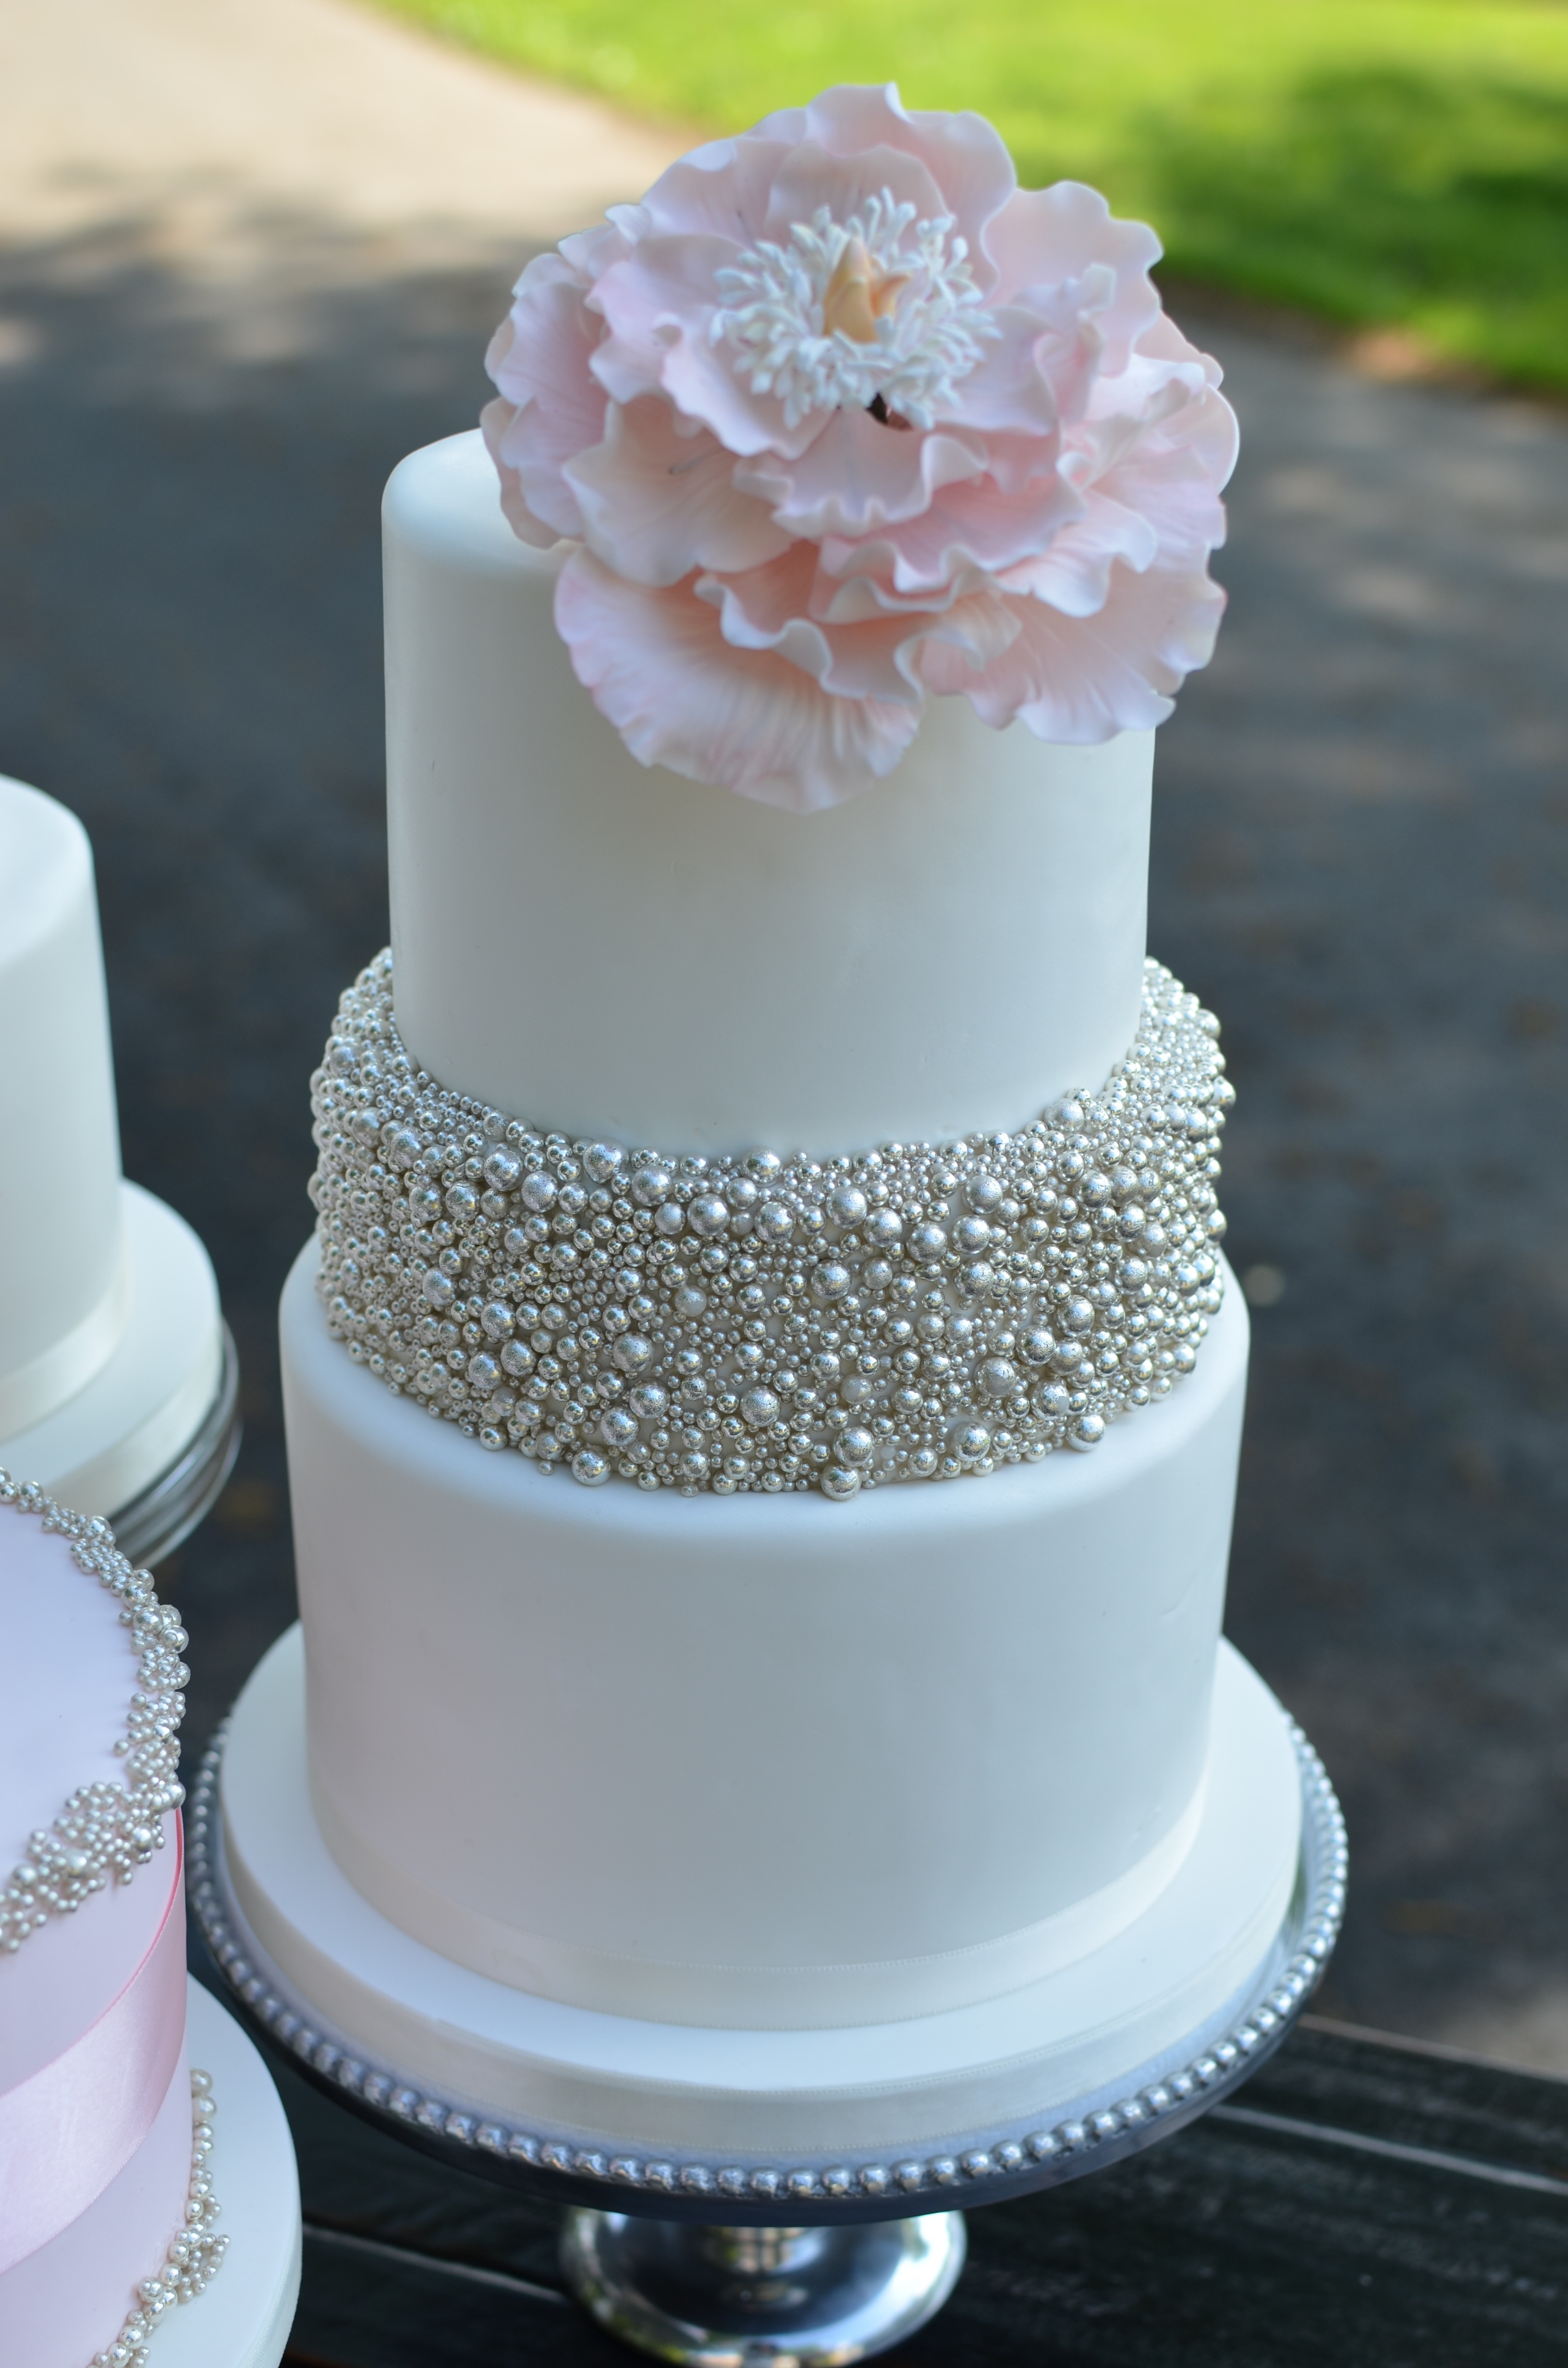 Pink And Silver Wedding Cakes
 Blush And Silver Wedding Cakes With Sugar Peonies